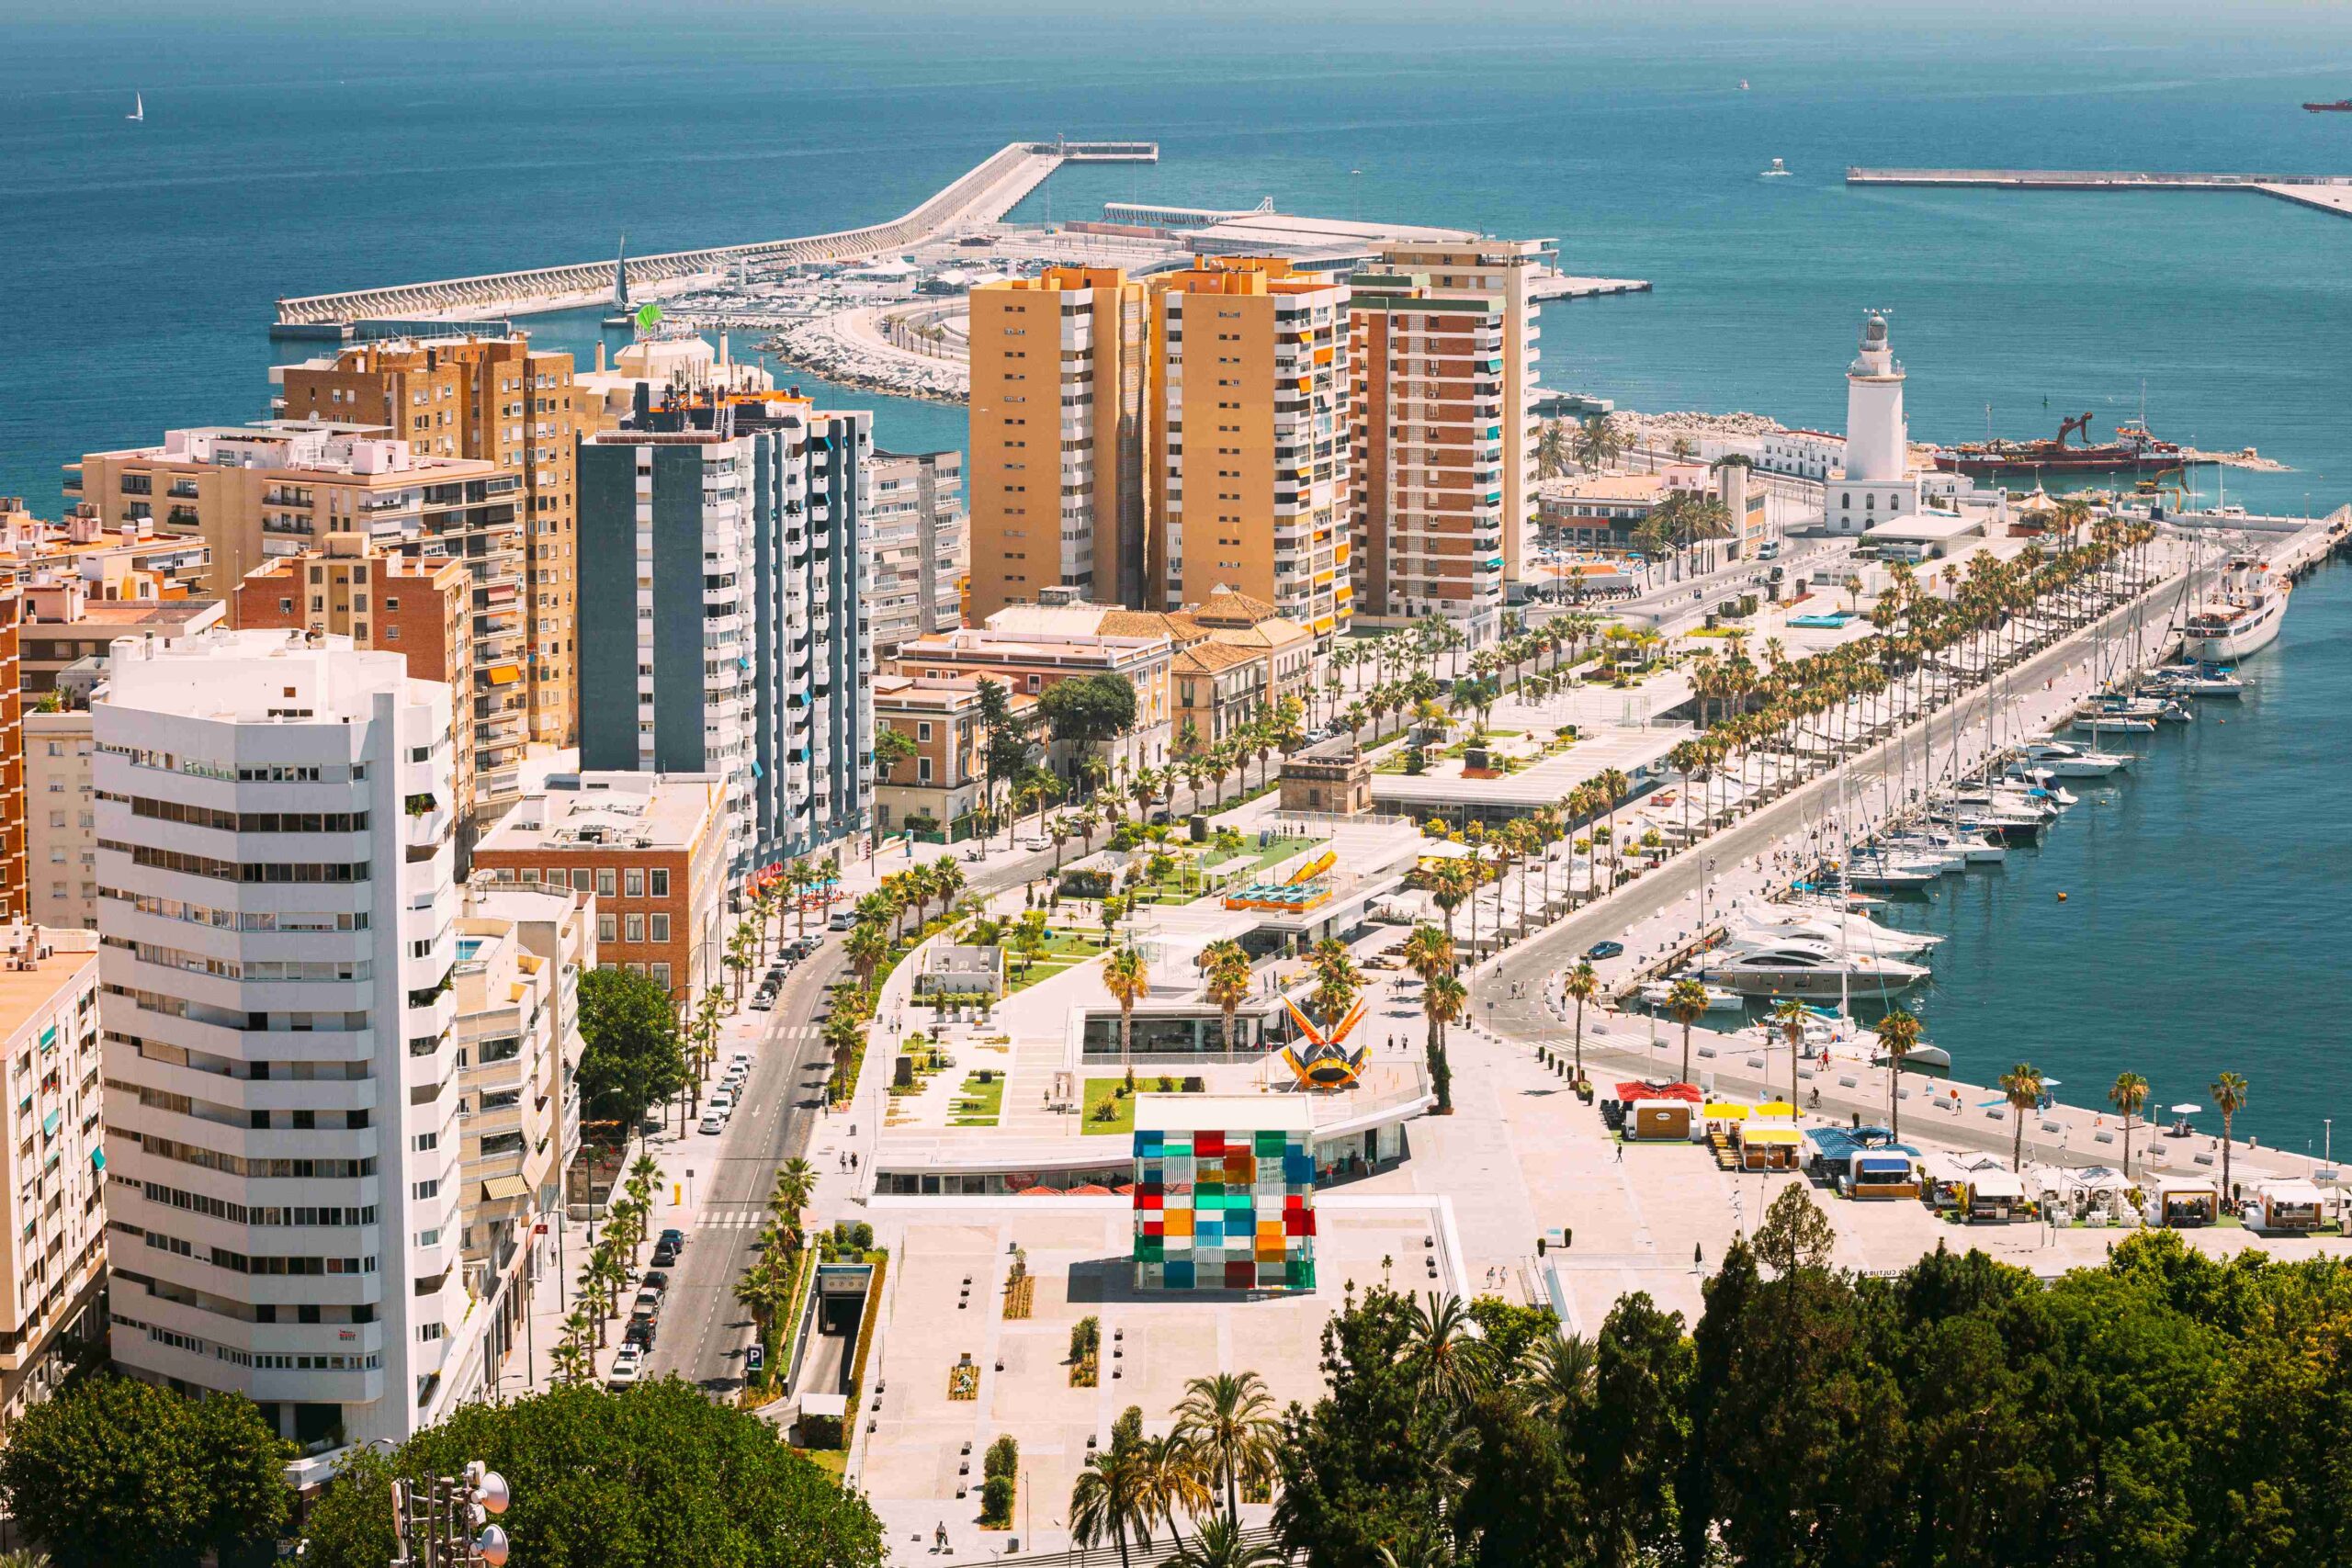 Malaga, the best city in the world